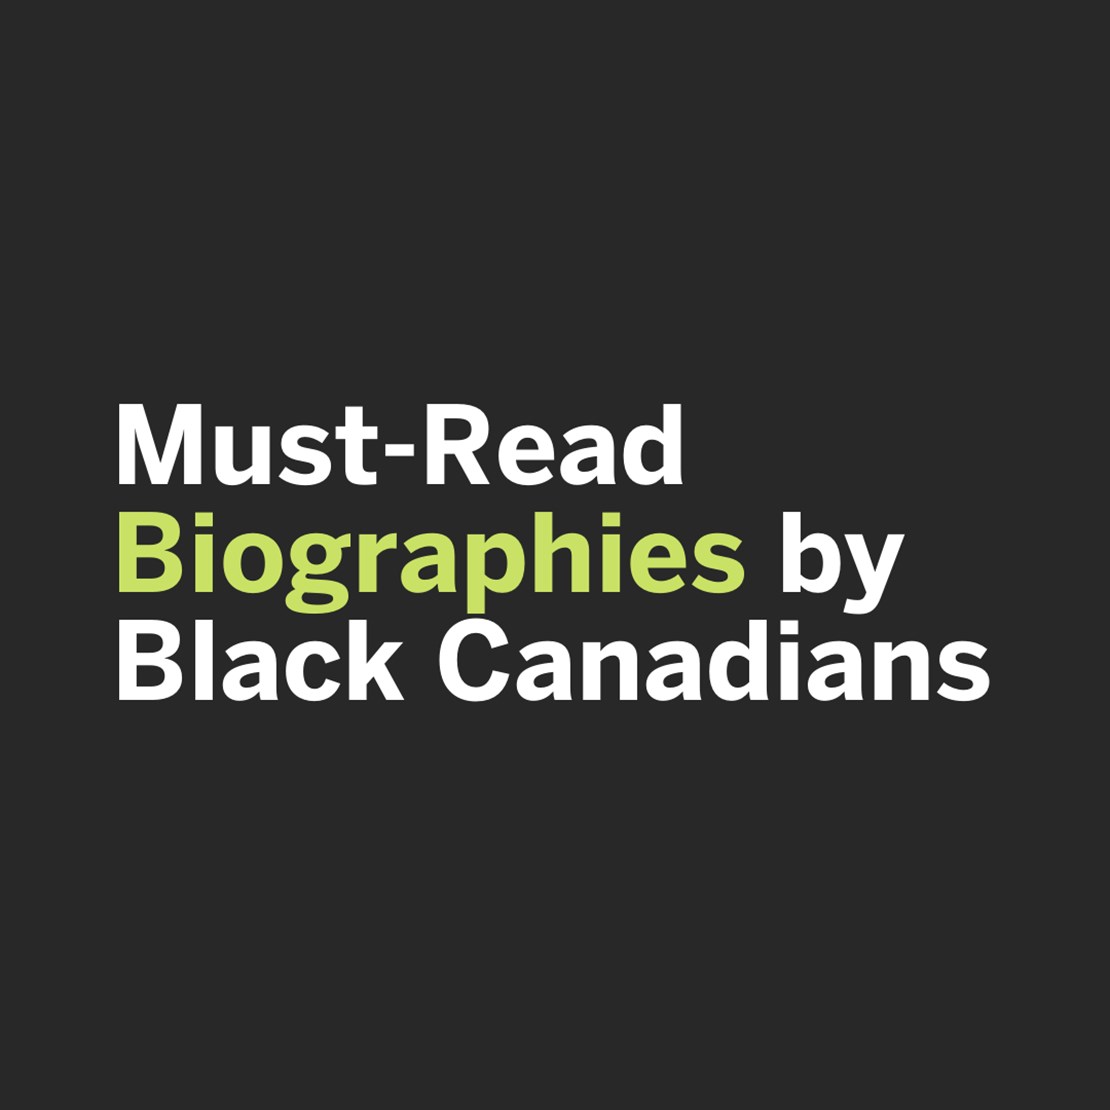 Must-Read Biographies by Black Canadians